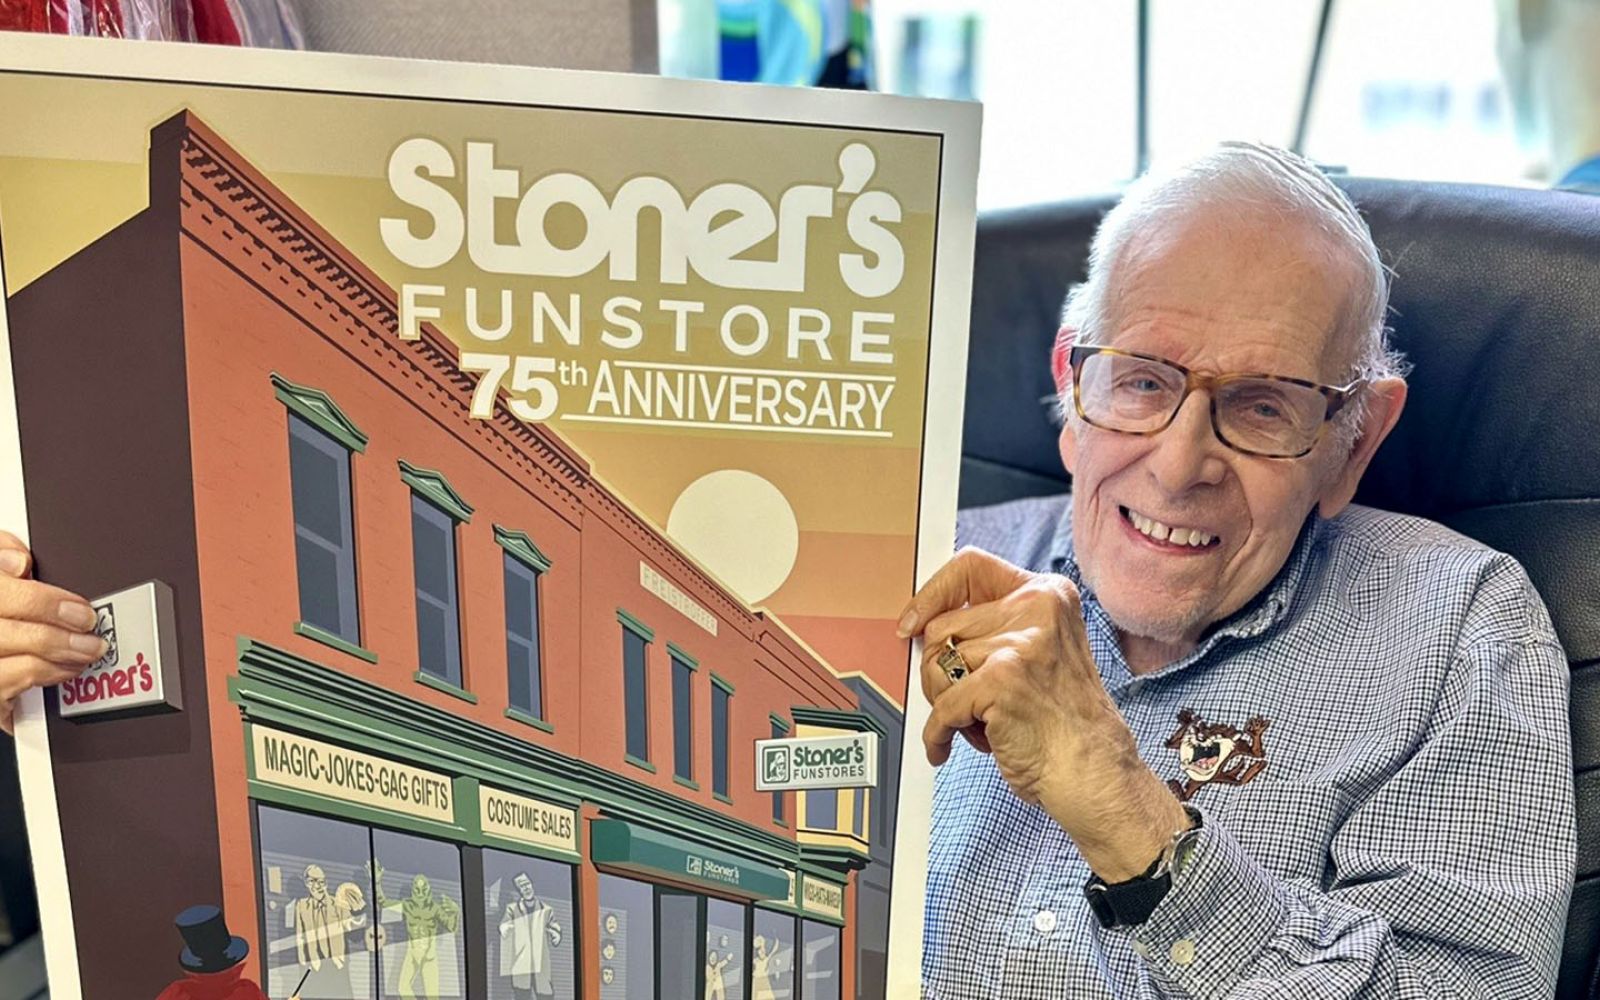 Dick Stoner holds the official poster by Phan Gear Prints for the Stoner’s Funstore 75th anniversary block party. The store began with his Dick Stoner’s father, Albert Stoner, in 1949.